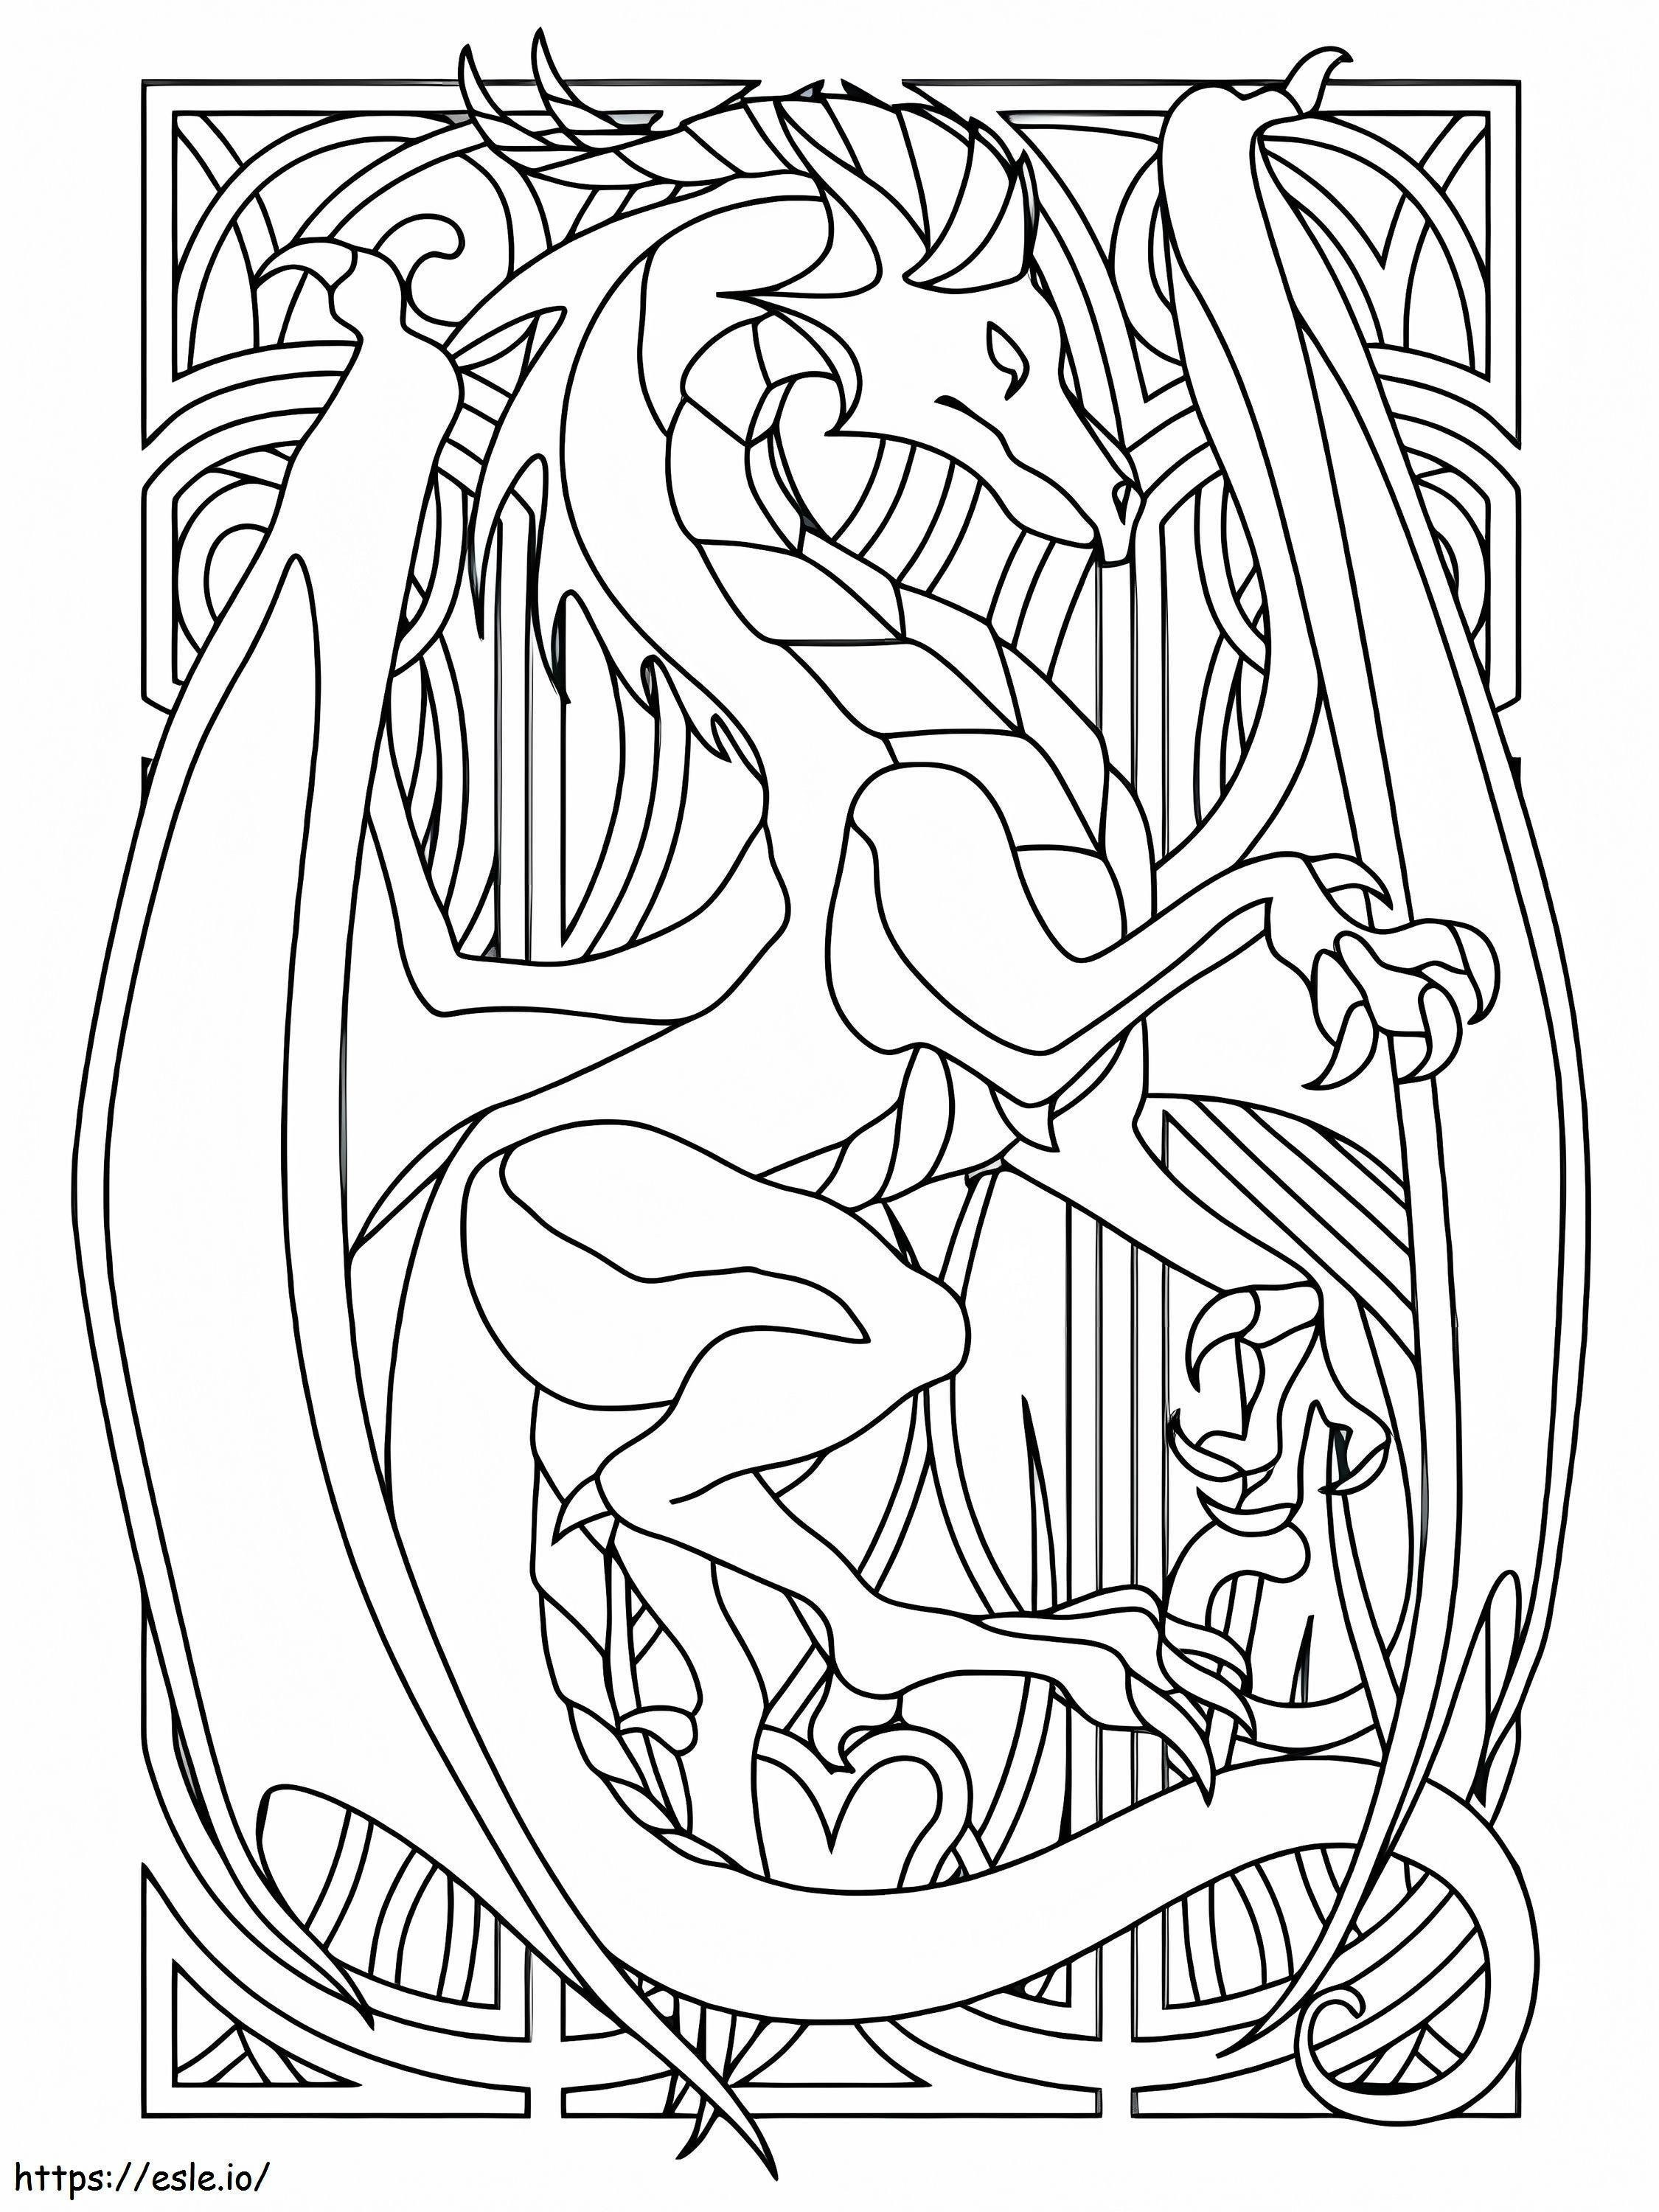 Dragon stained glass coloring page